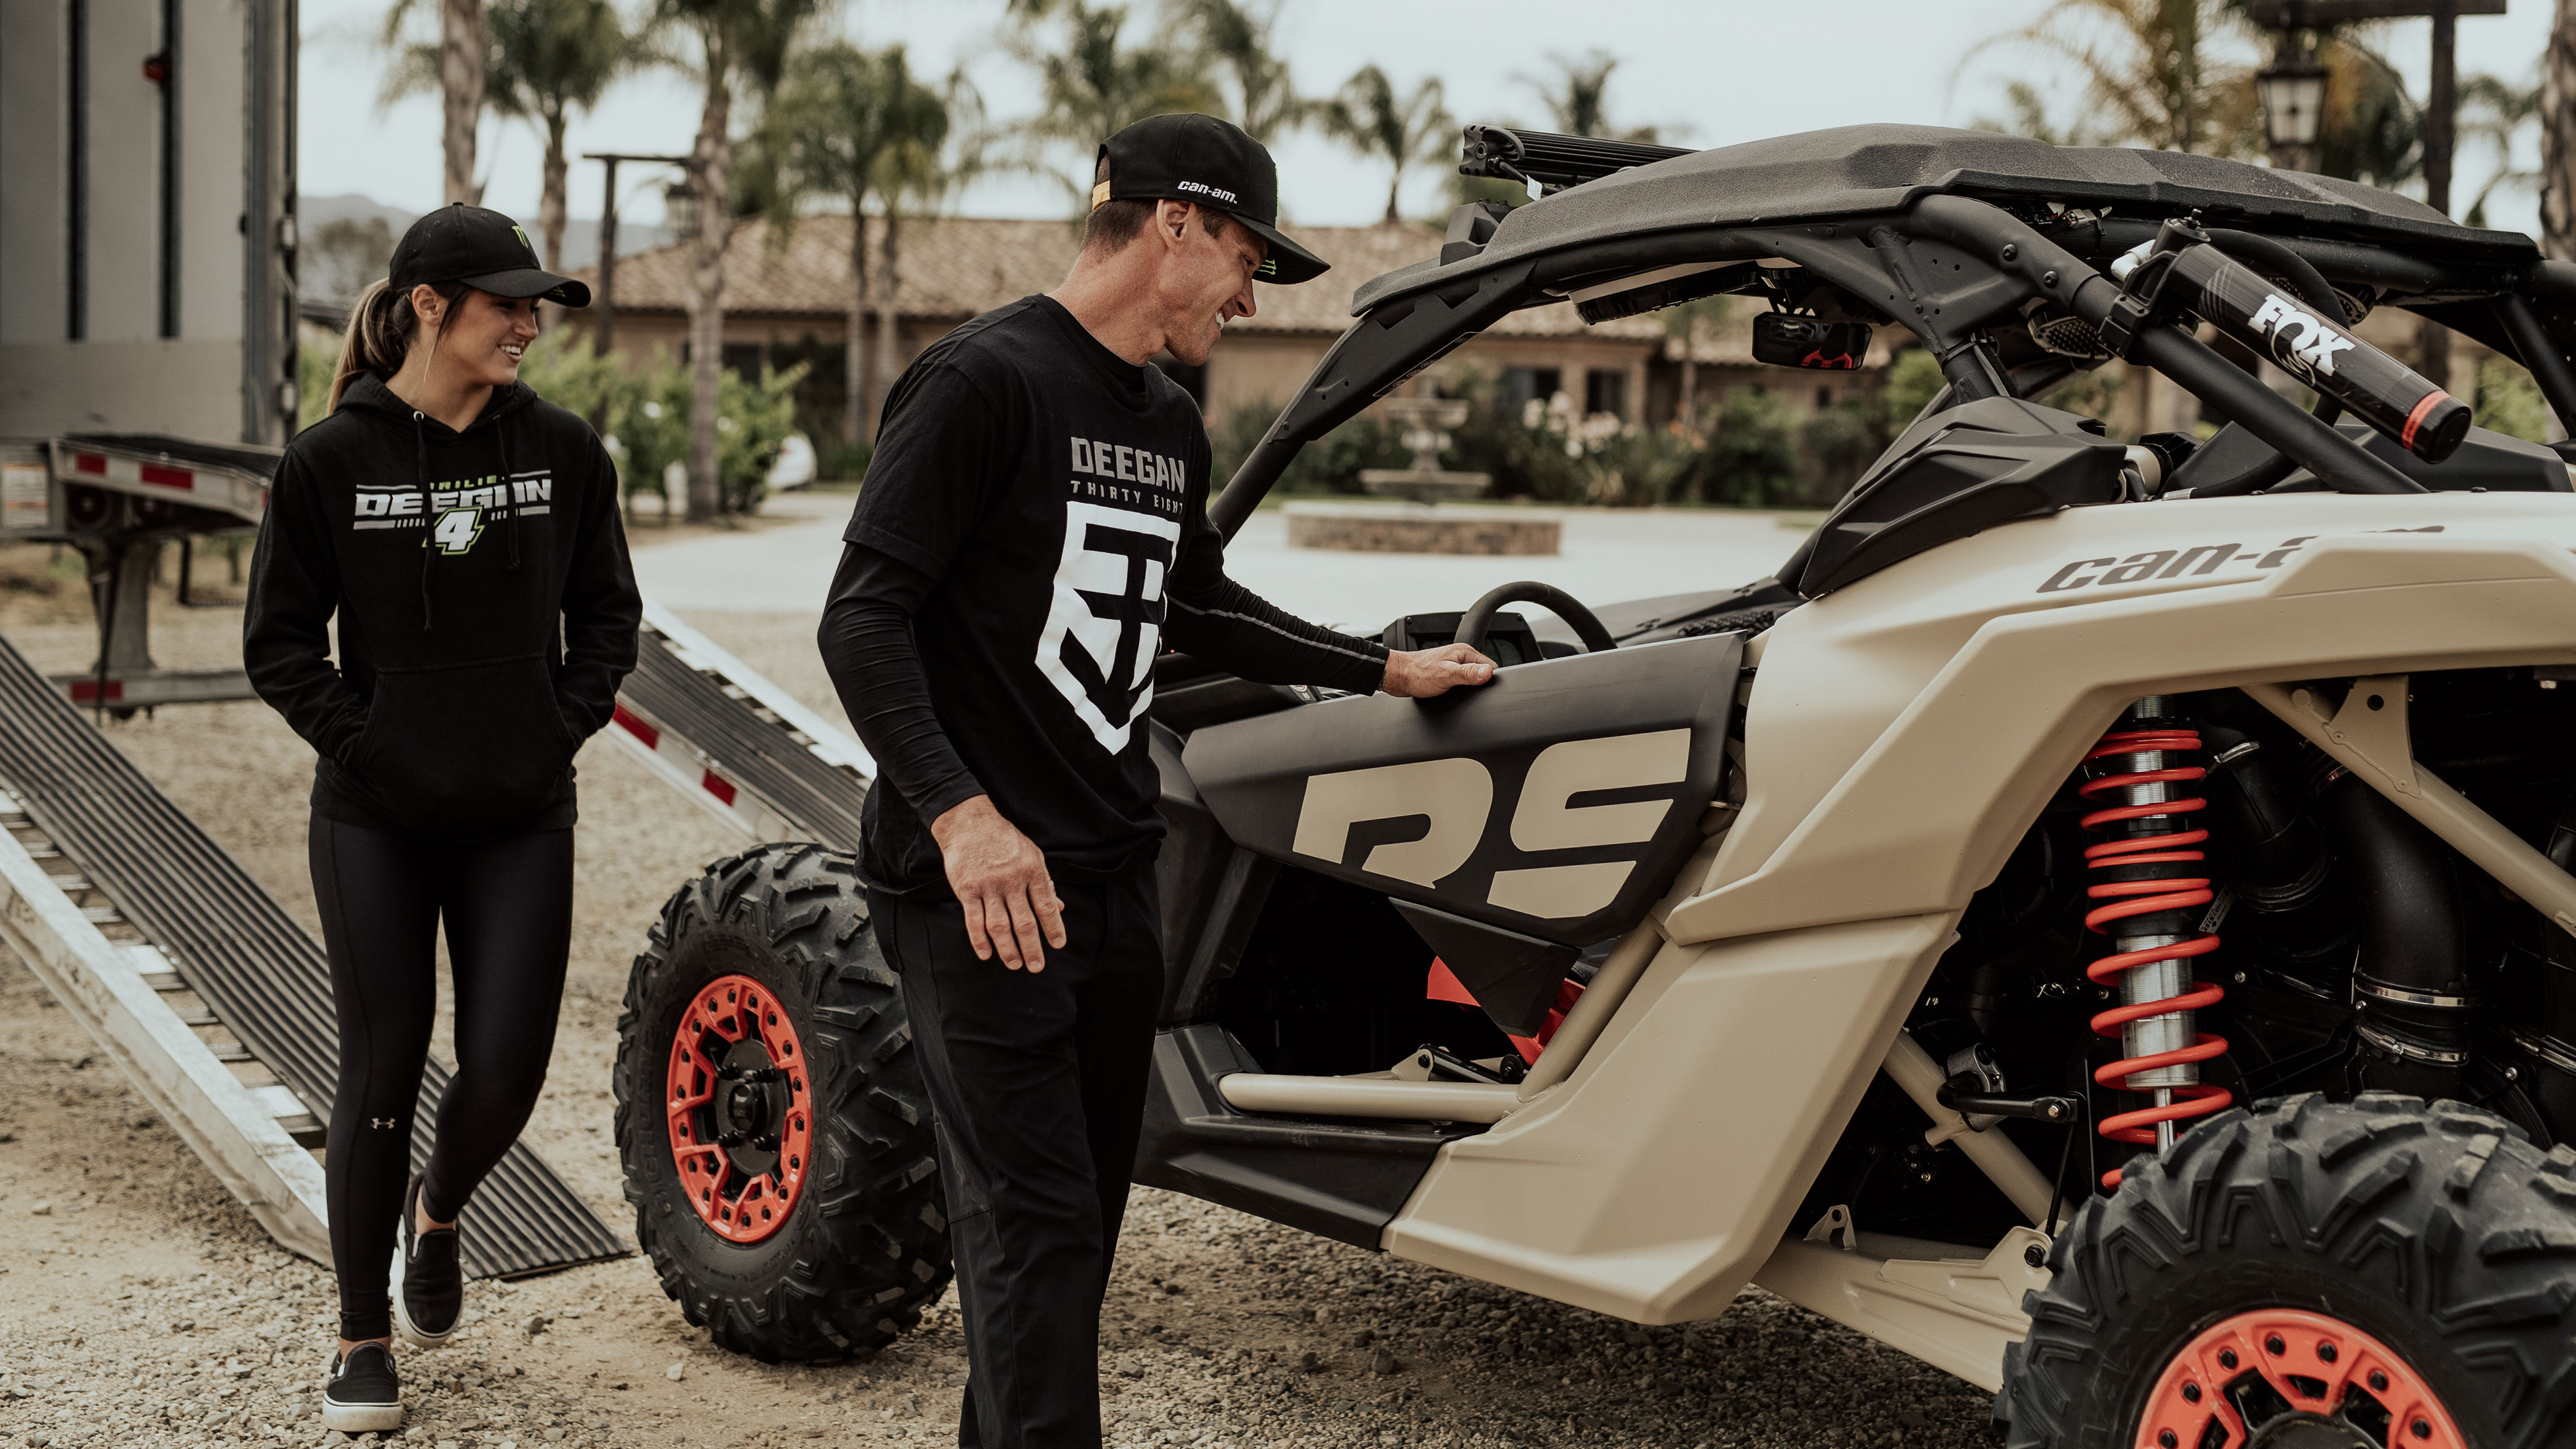 2 riders beside Can-Am Off-Road vehicle